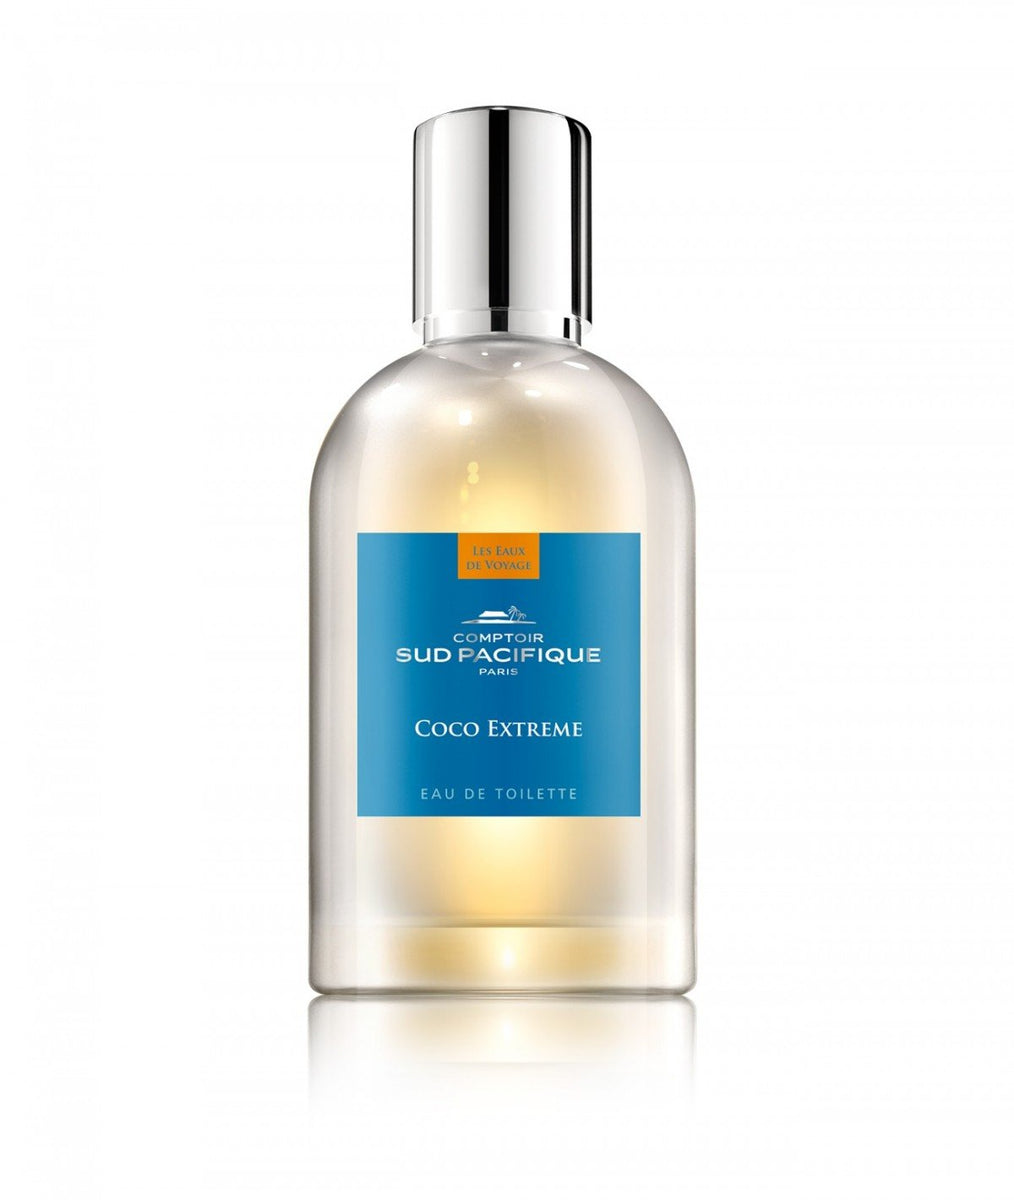 Comptoir Sud Pacifique Coco Extreme Perfume by Comptoir Sud Pacifique